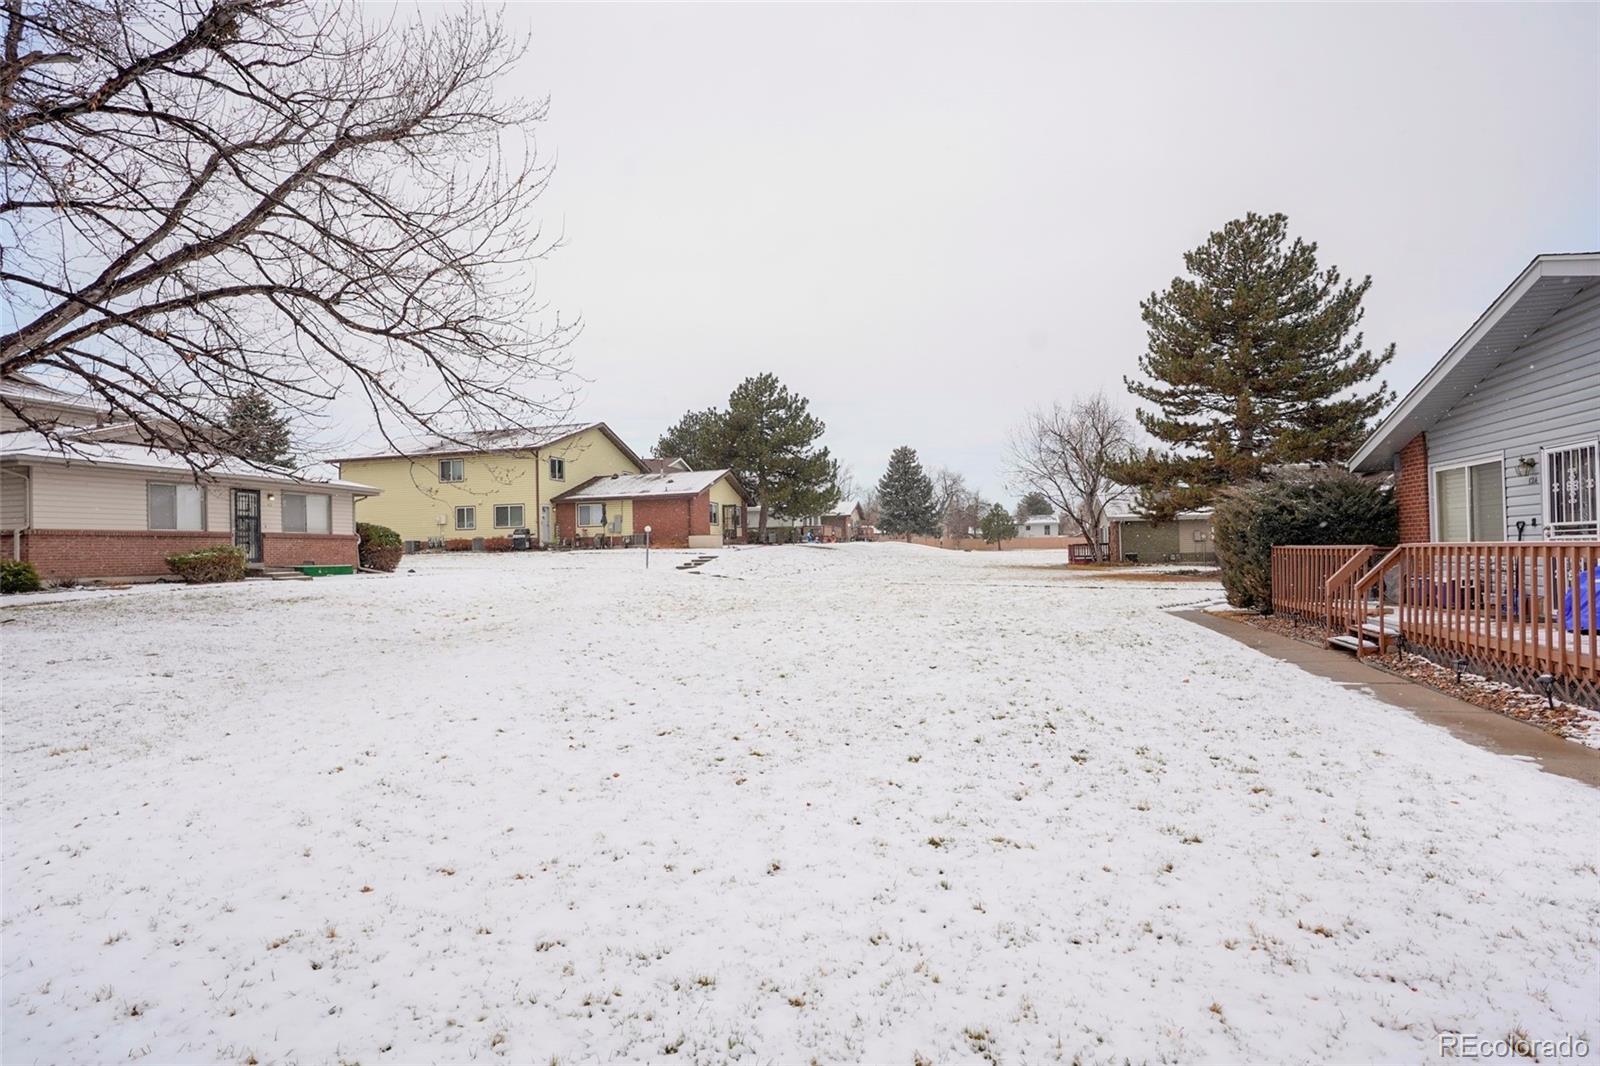 Report Image for 3355 S Flower Street,Lakewood, Colorado